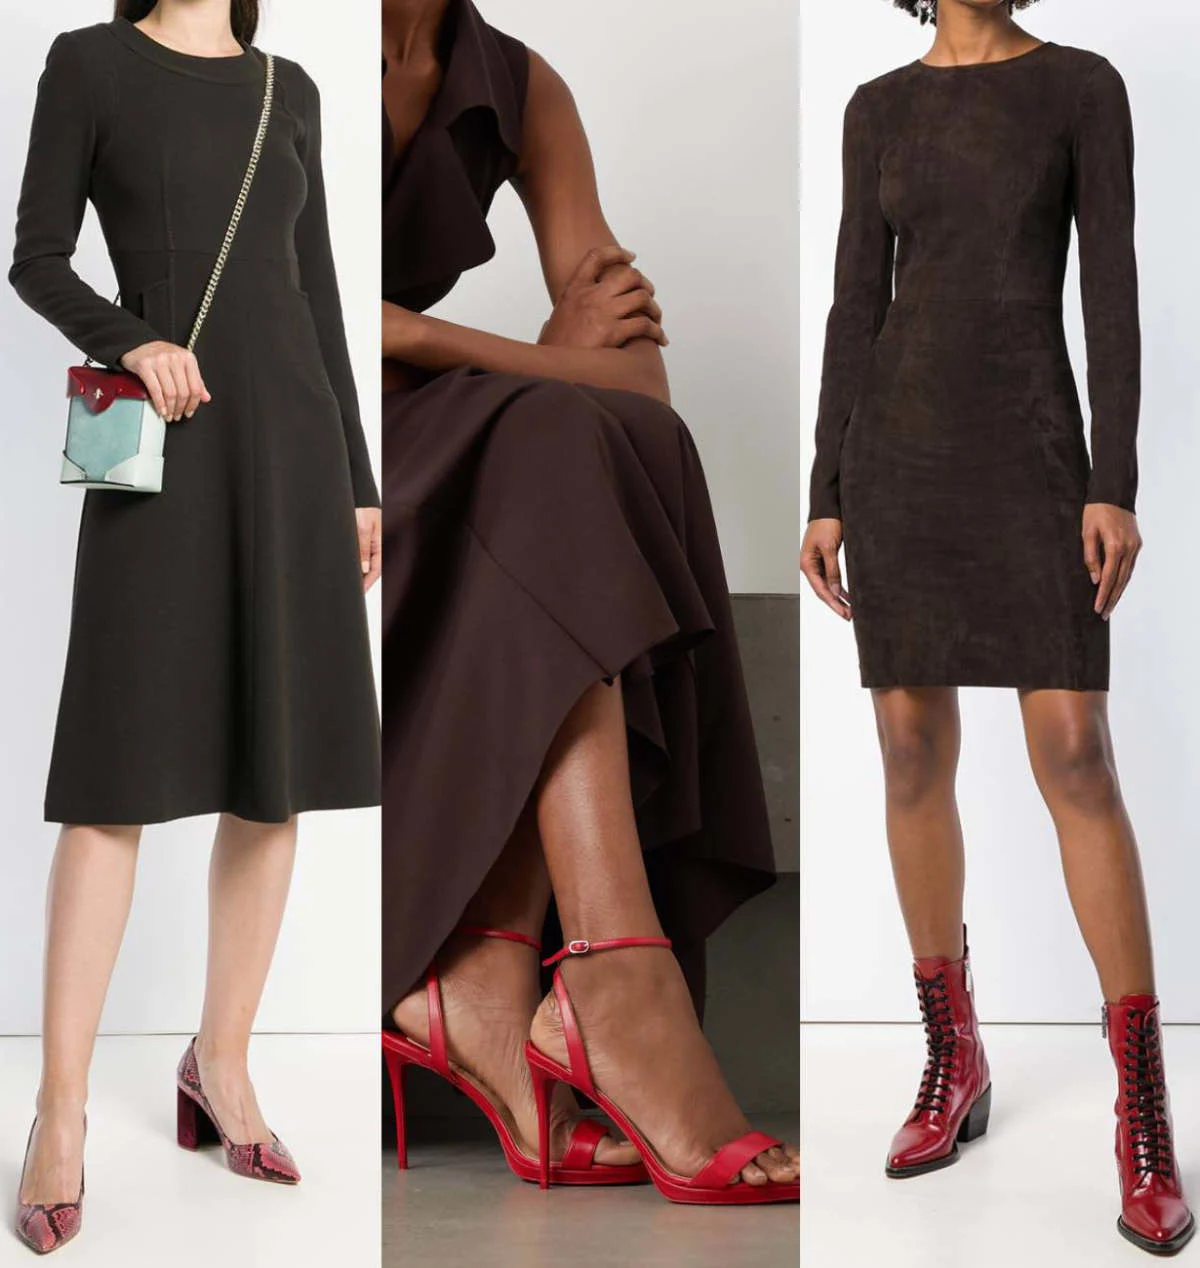 What Color Shoes with Brown Dress Outfits - 12 Best Colors to Wear!